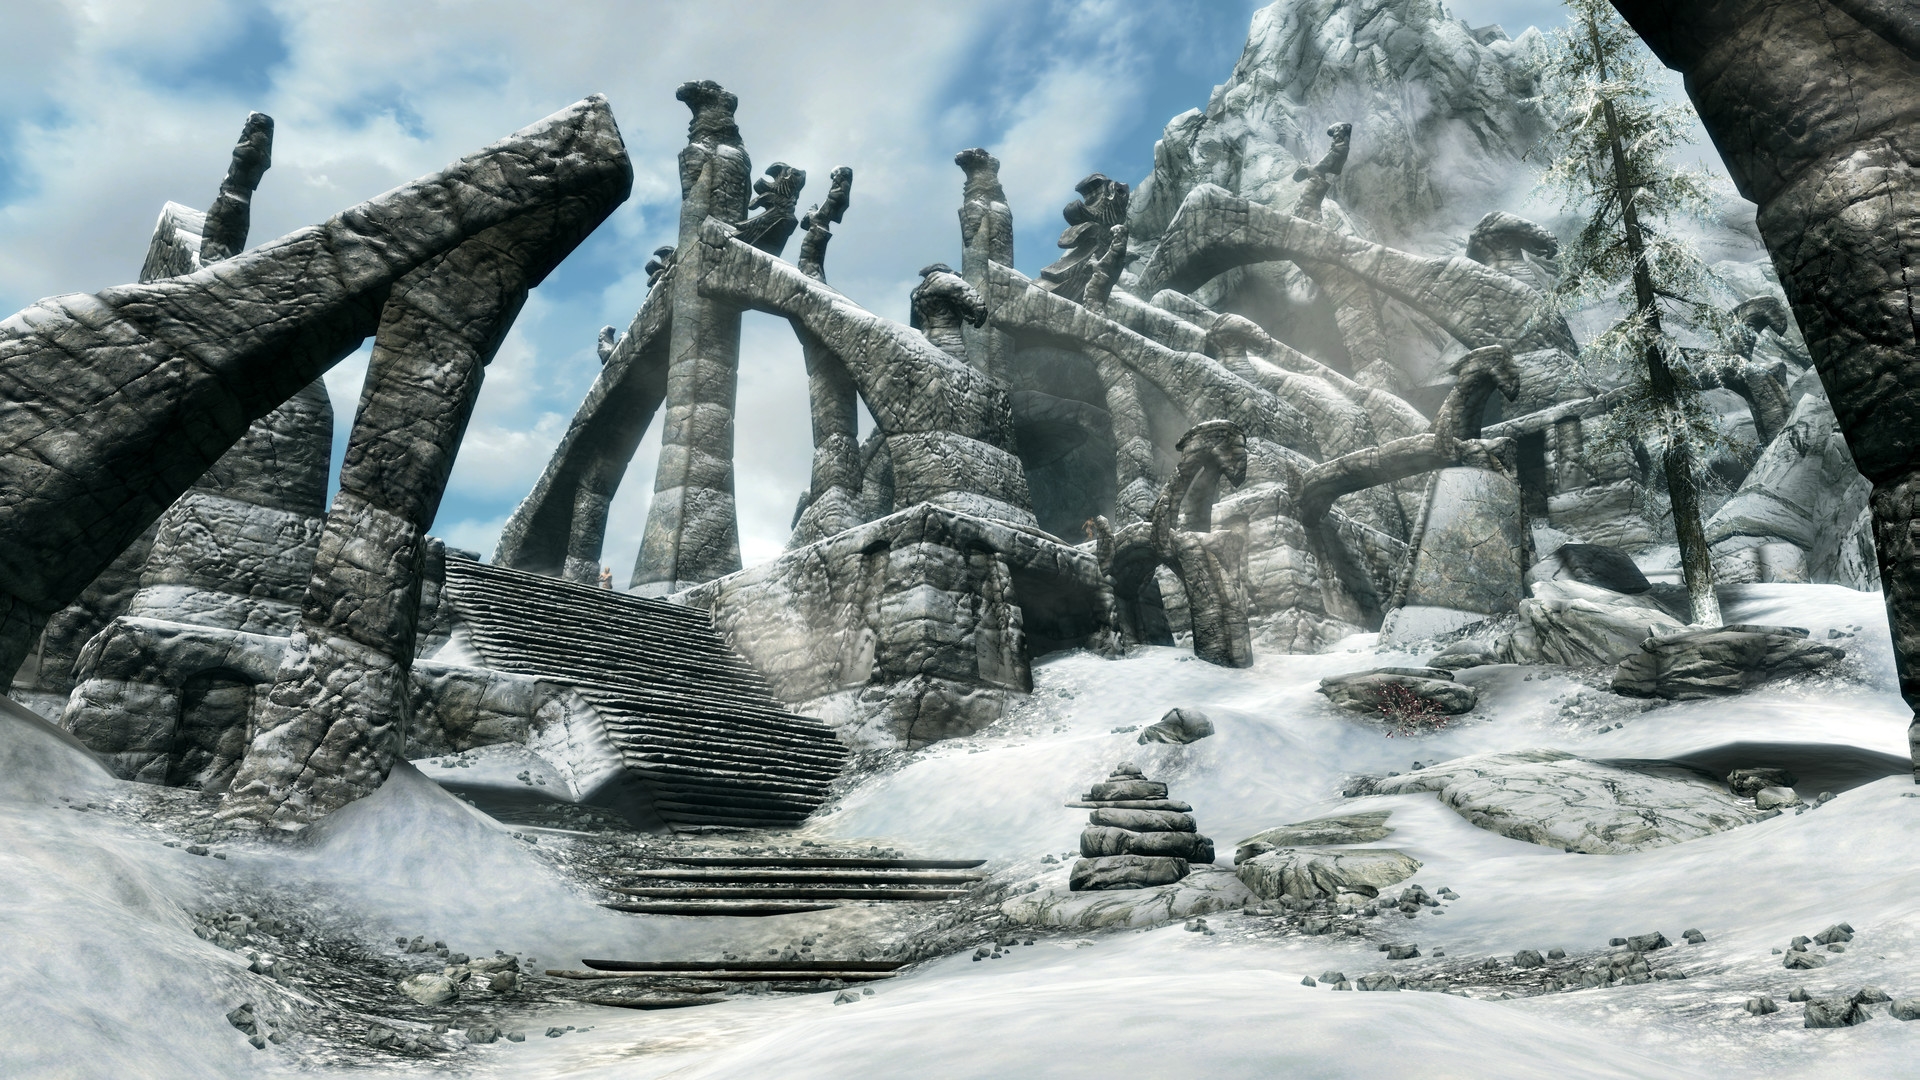 how to download mods for skyrim pc